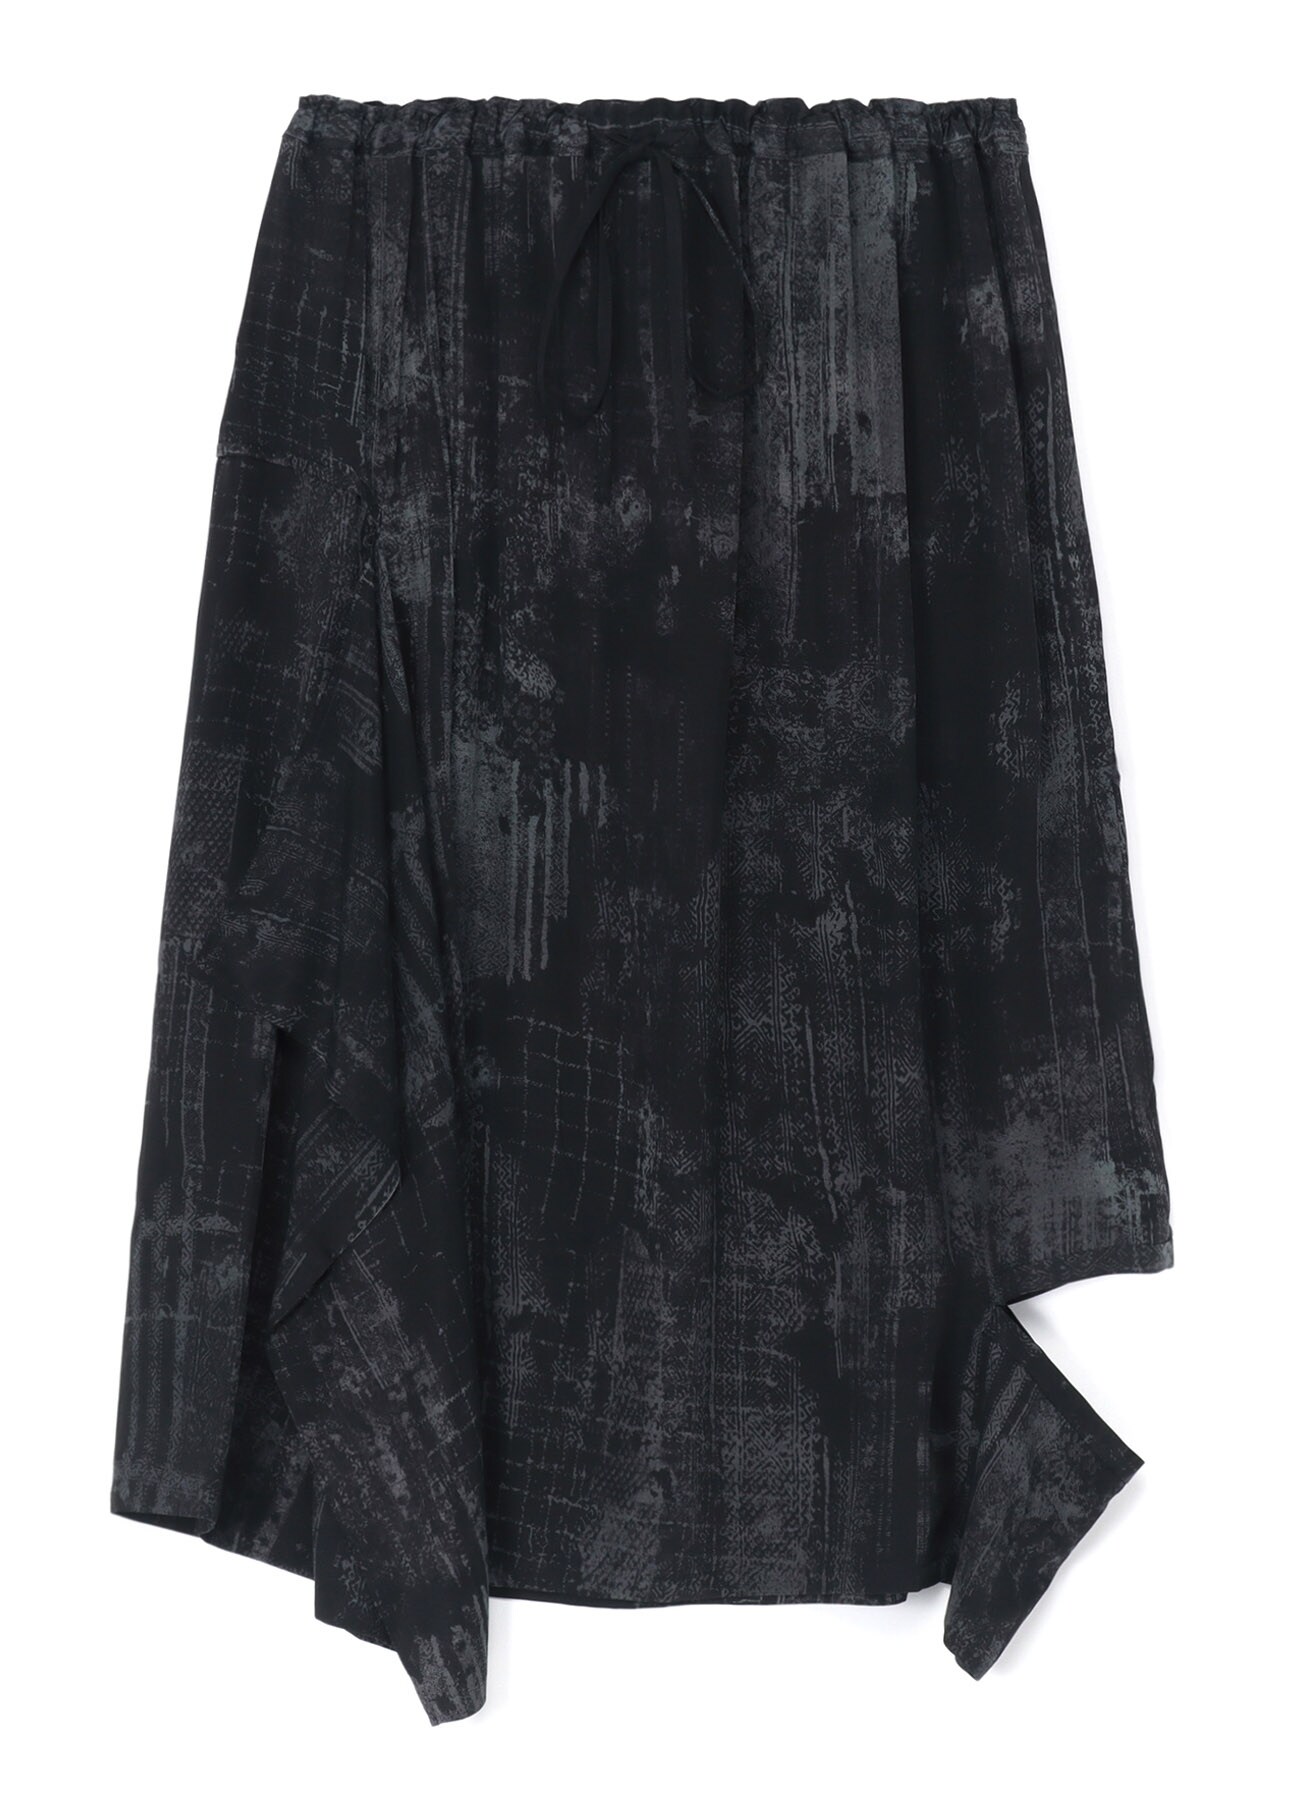 CURPO/RAYON TWILL LEFT HOLE DETAIL SKIRT